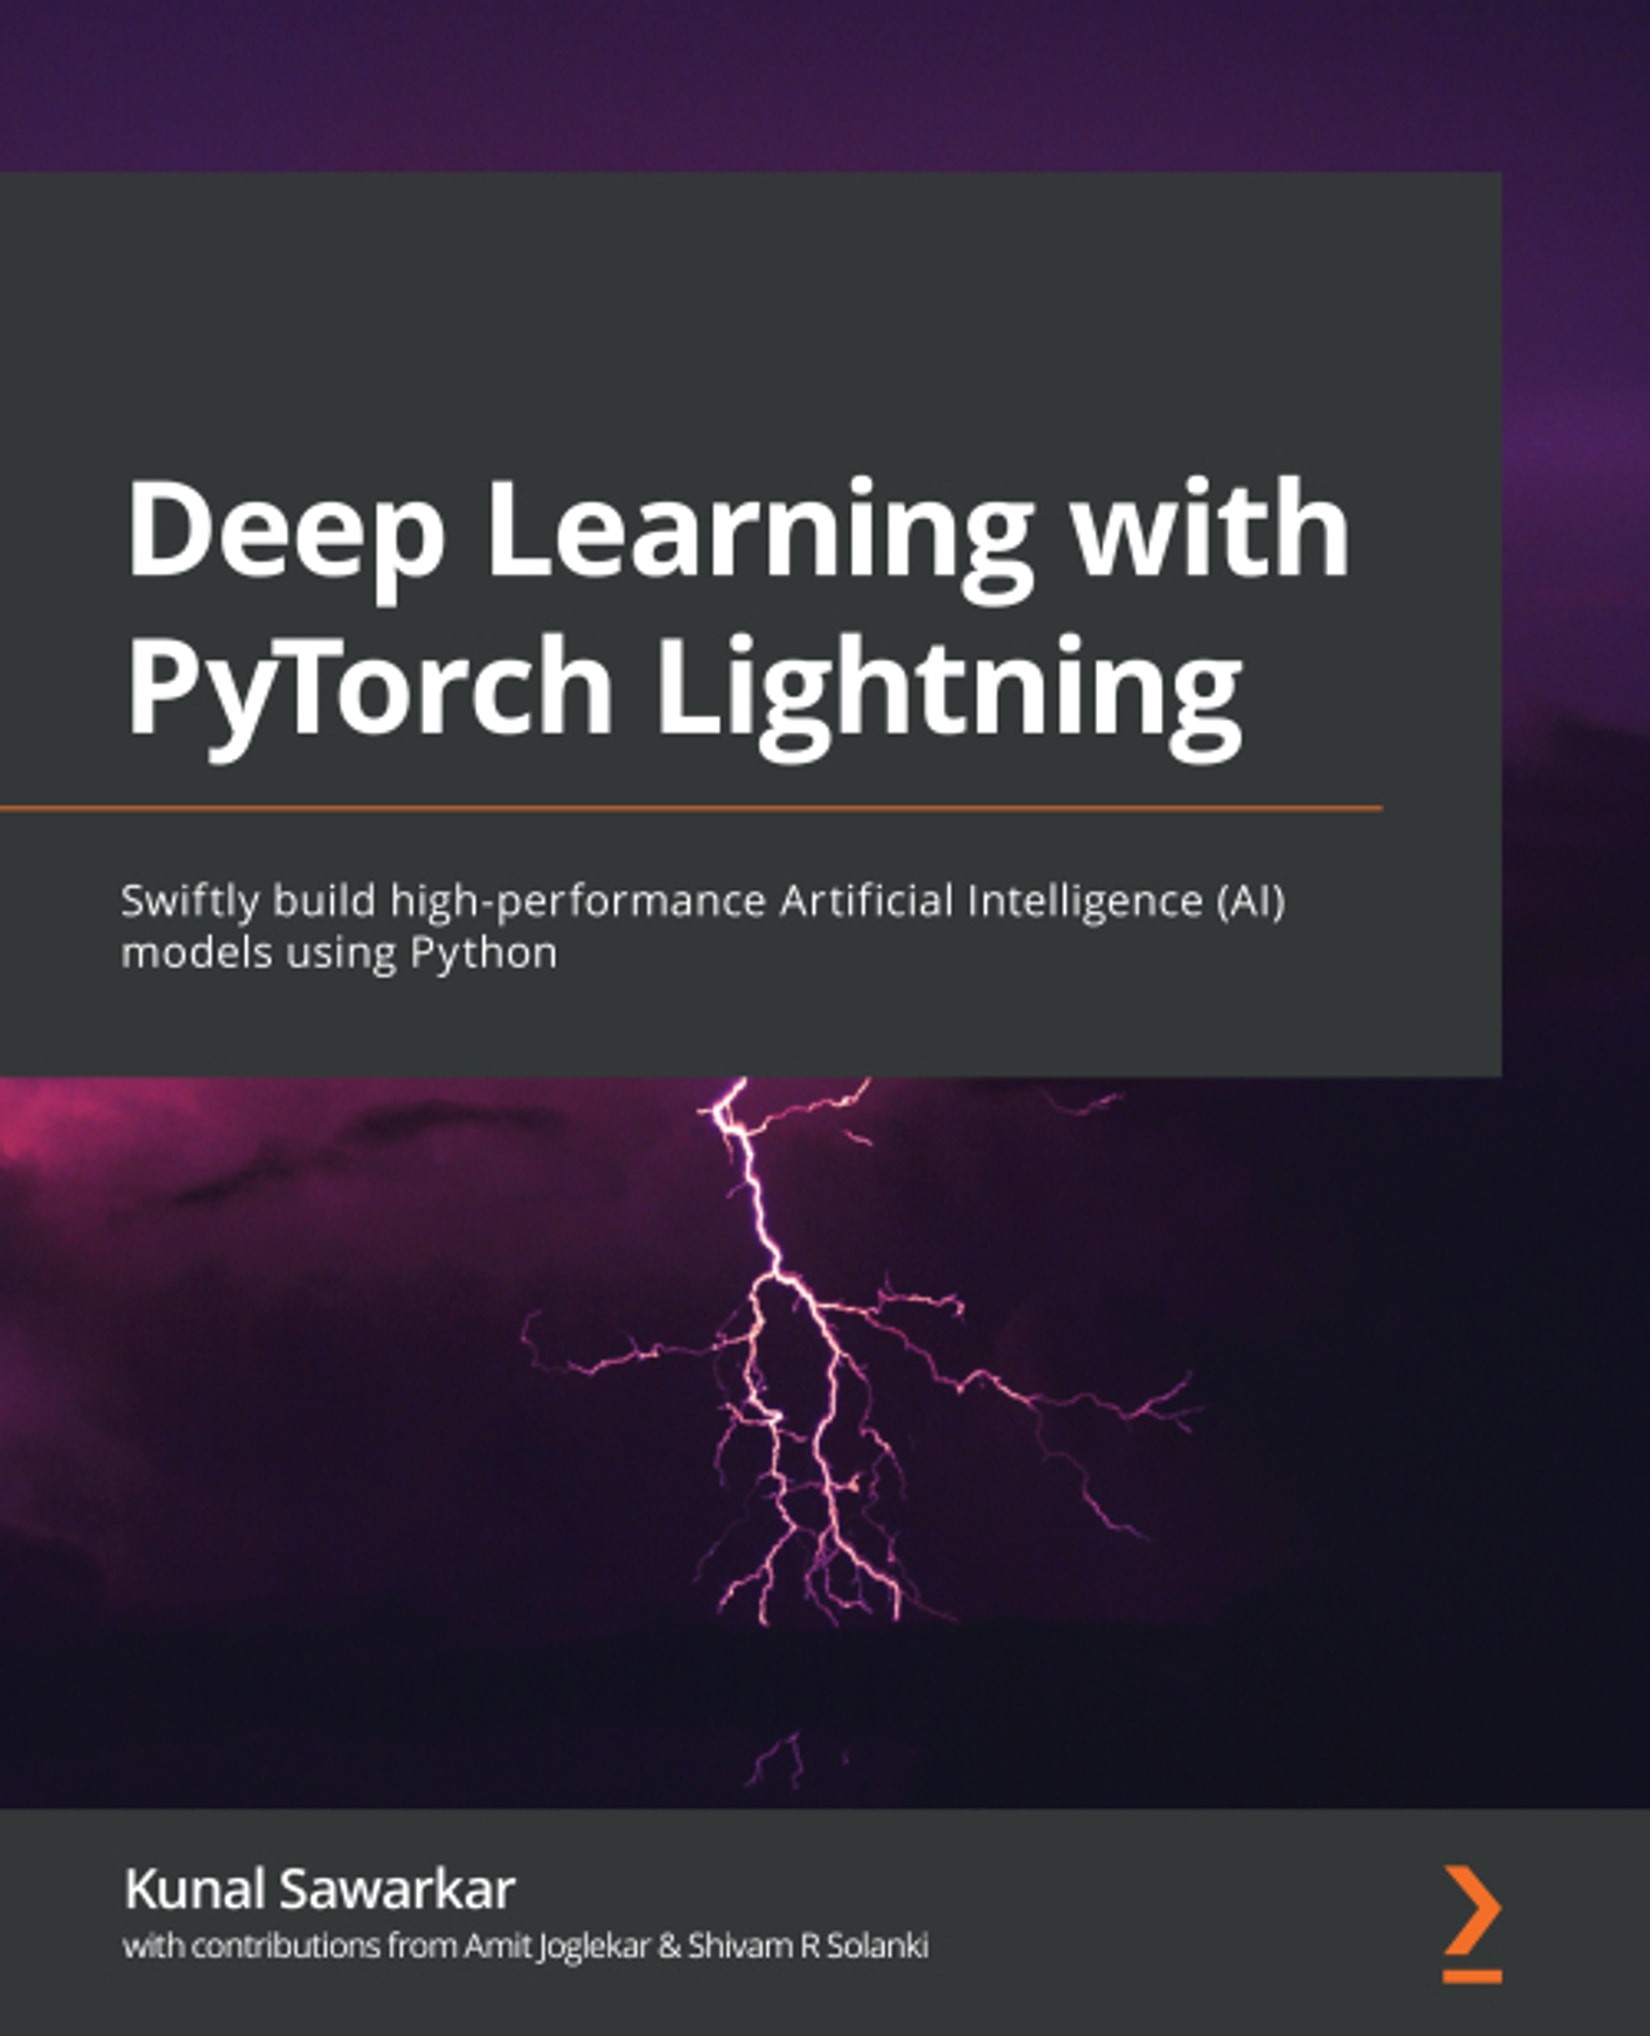 Deep Learning With PyTorch Lightning: Swiftly Build High-Performance Artificial Intelligence Models Using Python